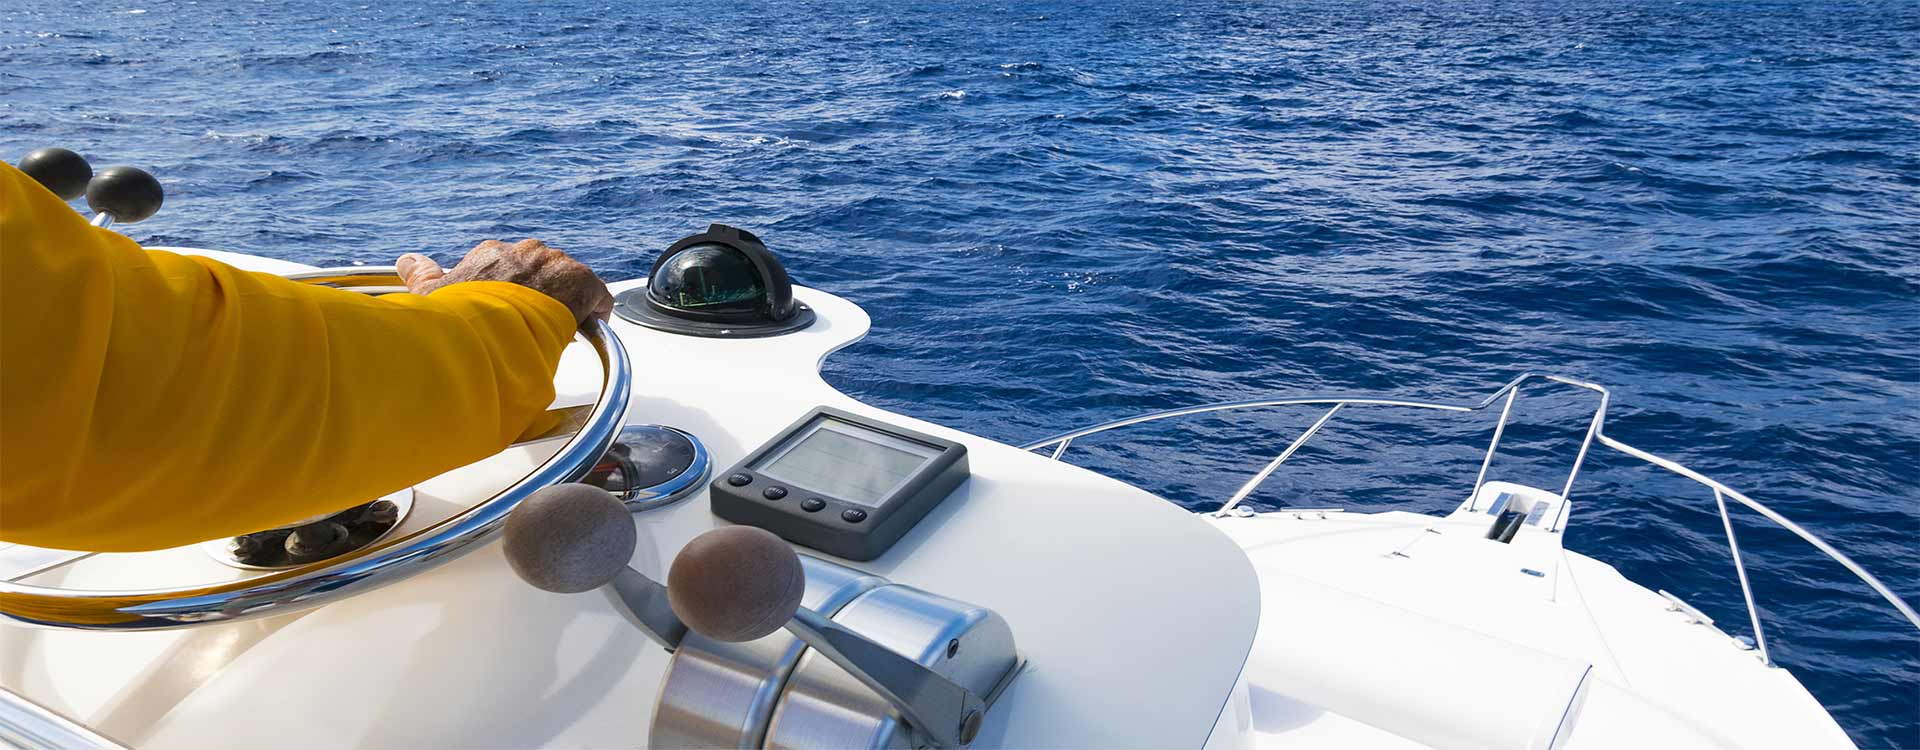 Own Boat Tuition and Private Boat Training